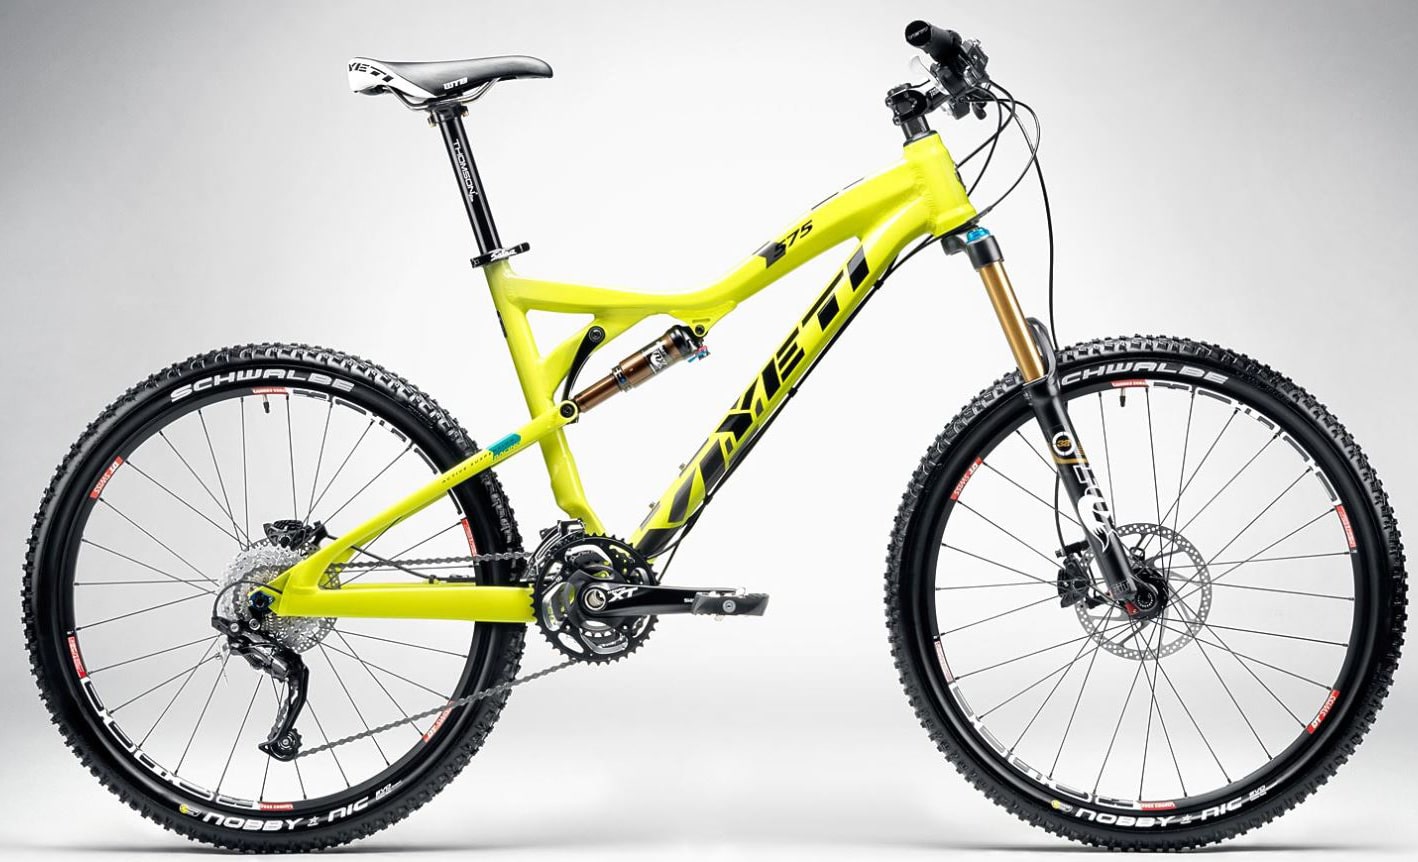 Thoughts of a New Mountain Bike